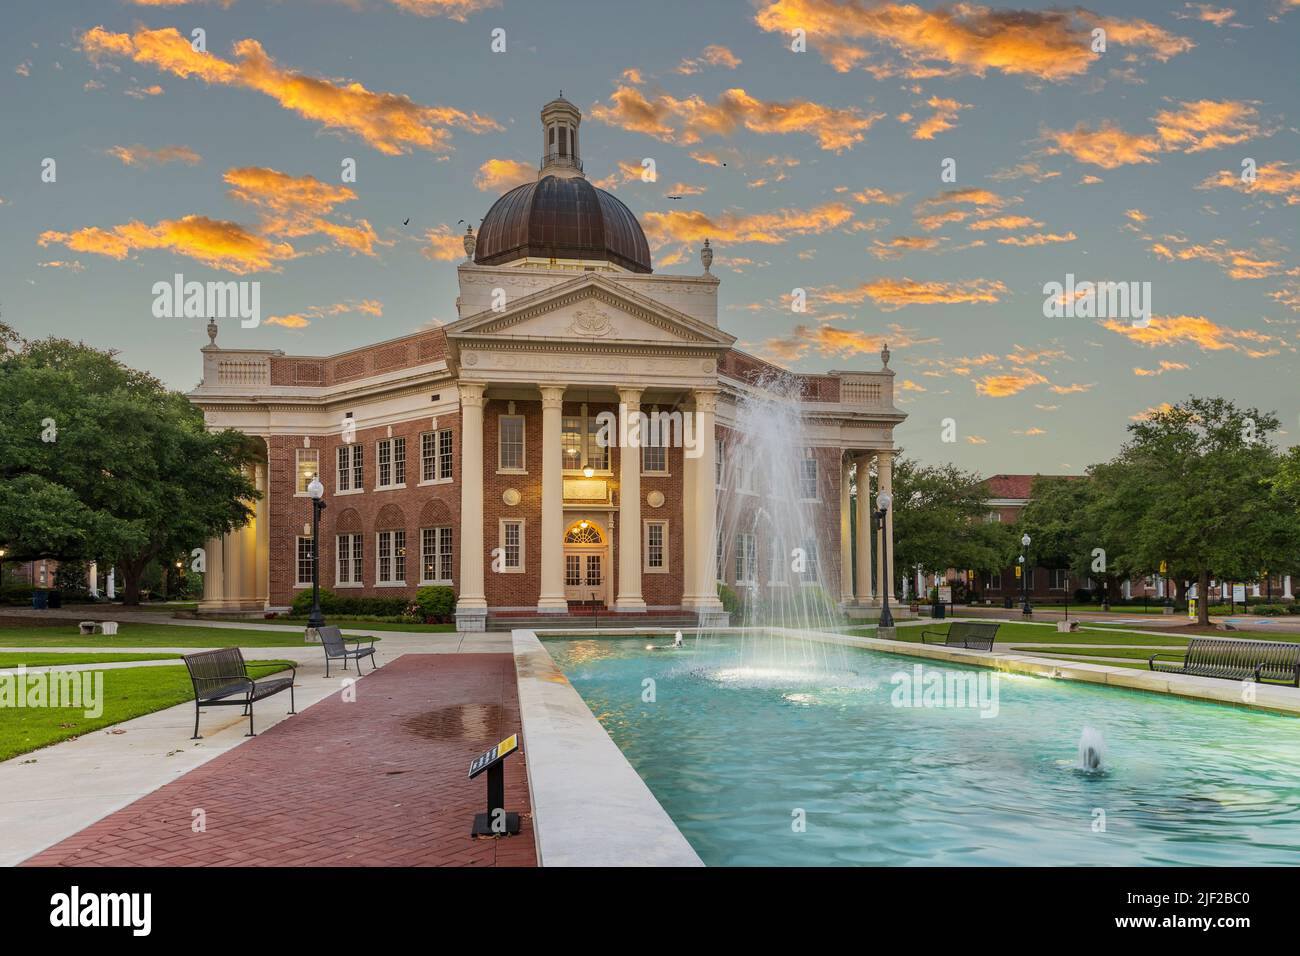 Hattiesburg, MS - June 12, 2022: The Administration Building on the campus of the University of Southern Mississippi Stock Photo